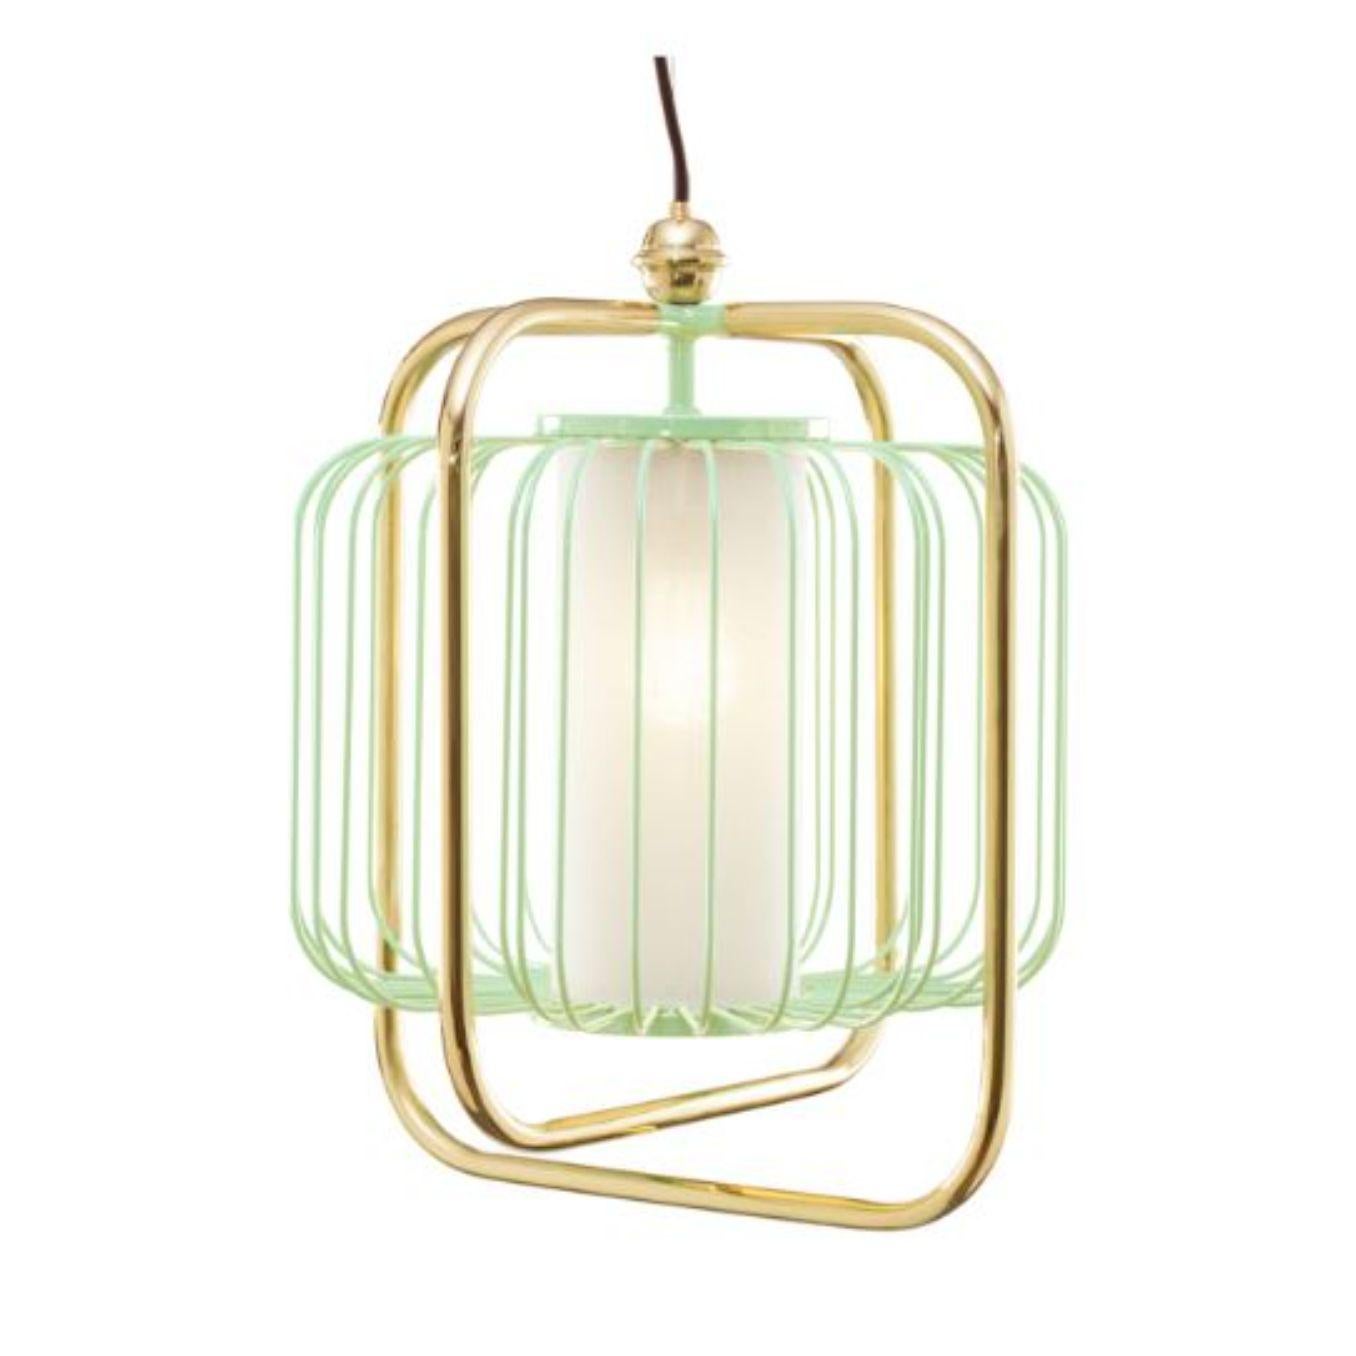 Brass and dream Jules III suspension lamp by Dooq
Dimensions: W 38 x D 38 x H 44 cm
Materials: lacquered metal, polished or brushed metal, brass.
abat-jour: cotton
Also available in different colours and